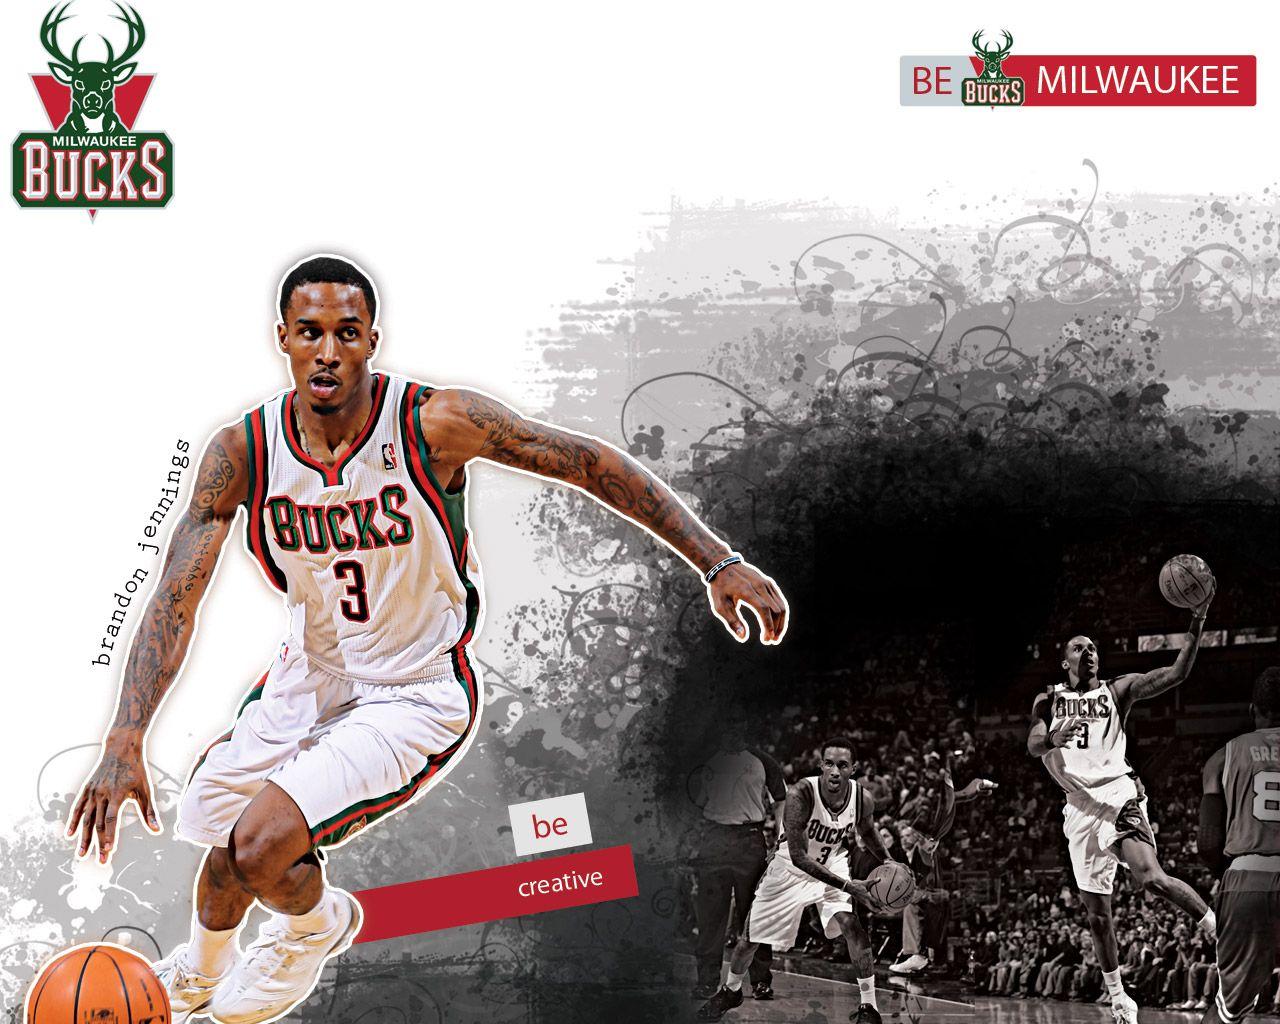 Roster: Brandon Jennings 2012 13. THE OFFICIAL SITE OF THE